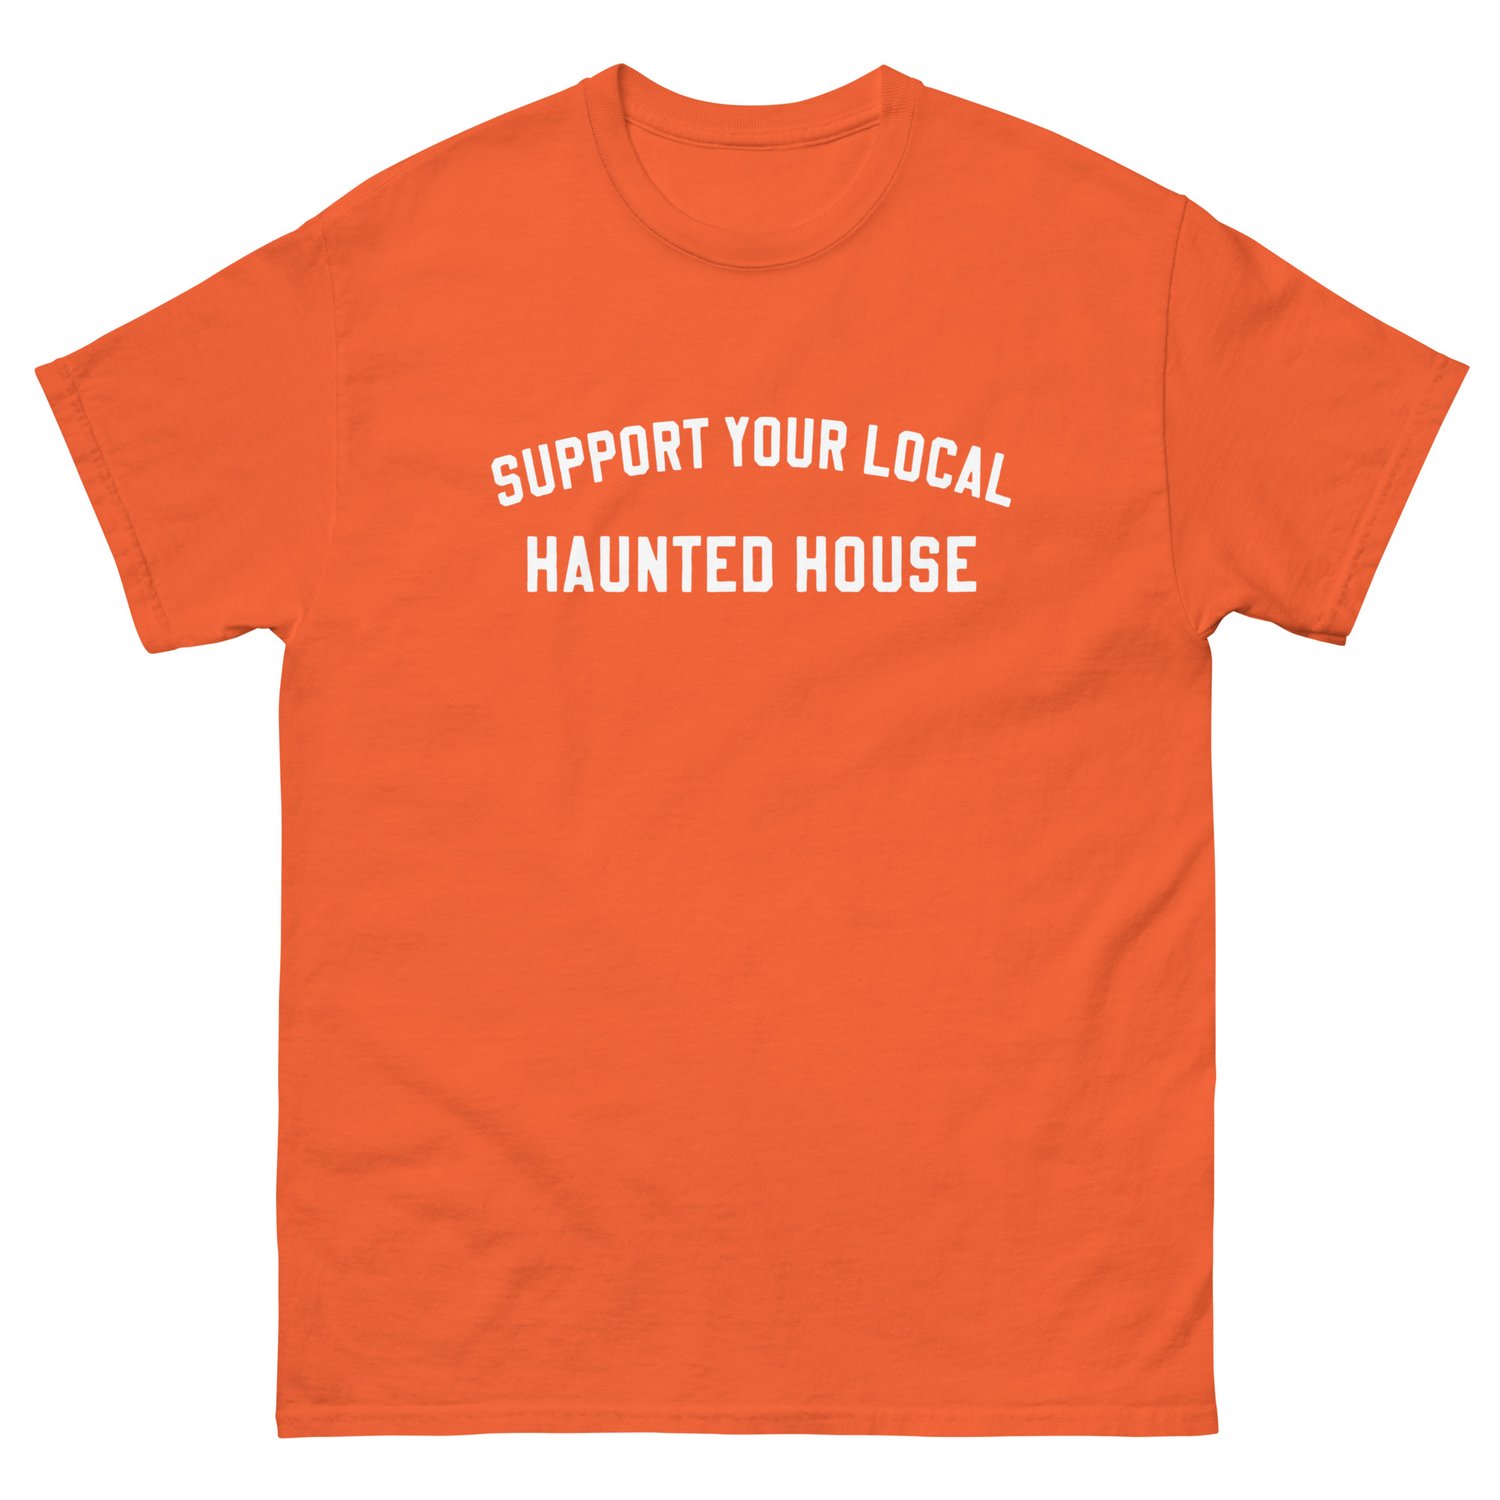 Image of Support Your Local Haunted House tee